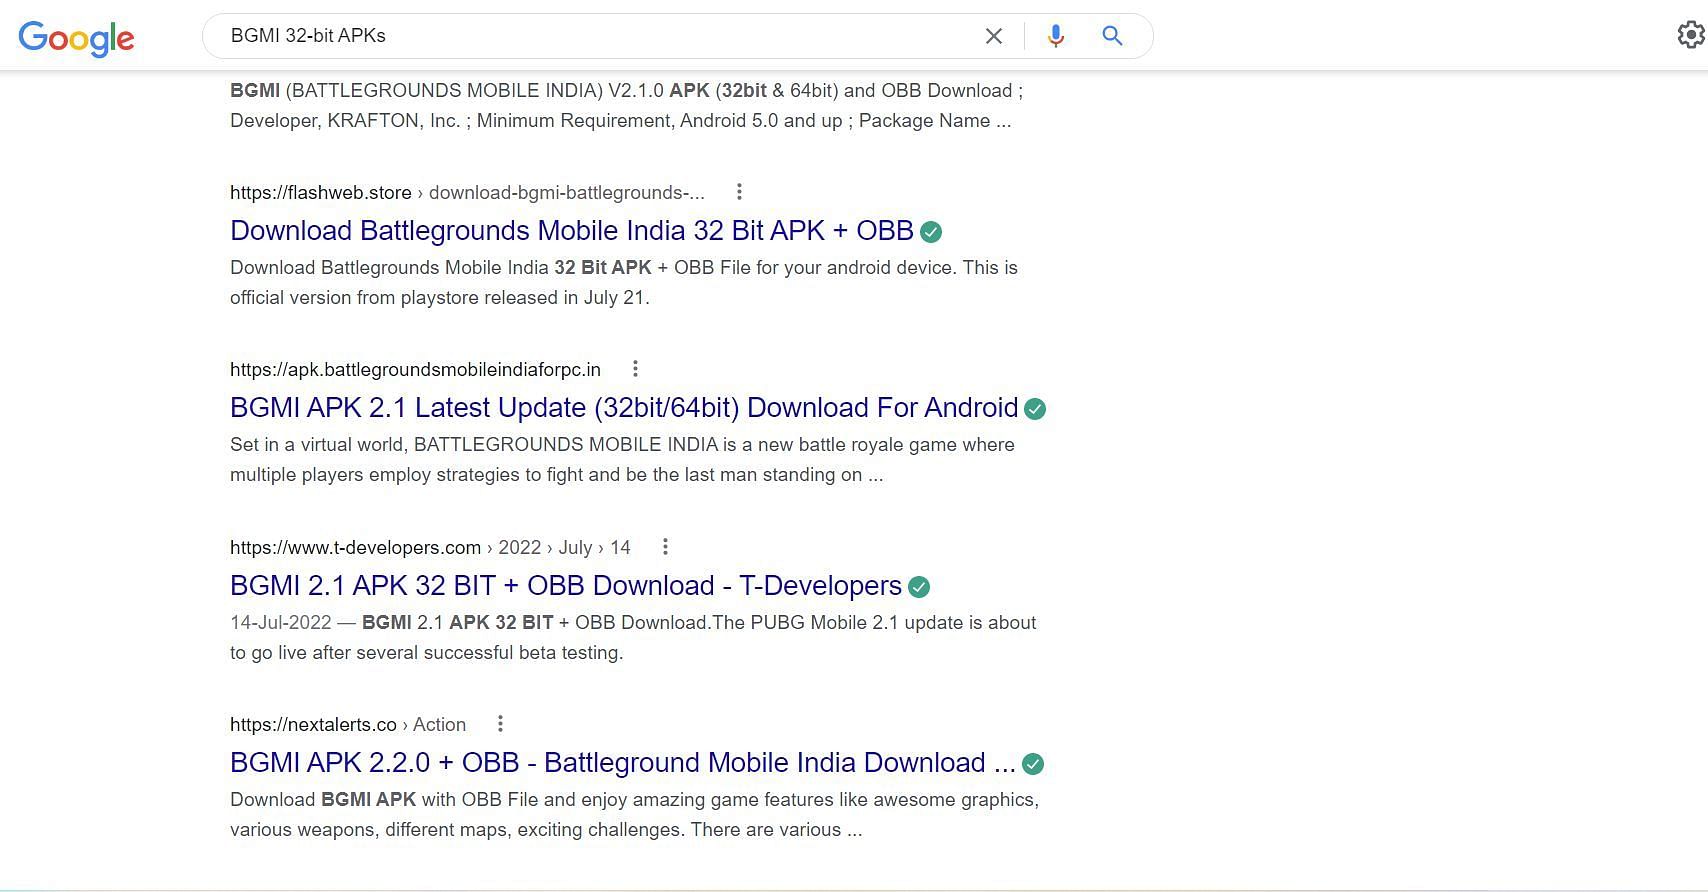 Many fake links for the latest version of BGMI 32-bit APKs are available (Image via Google)